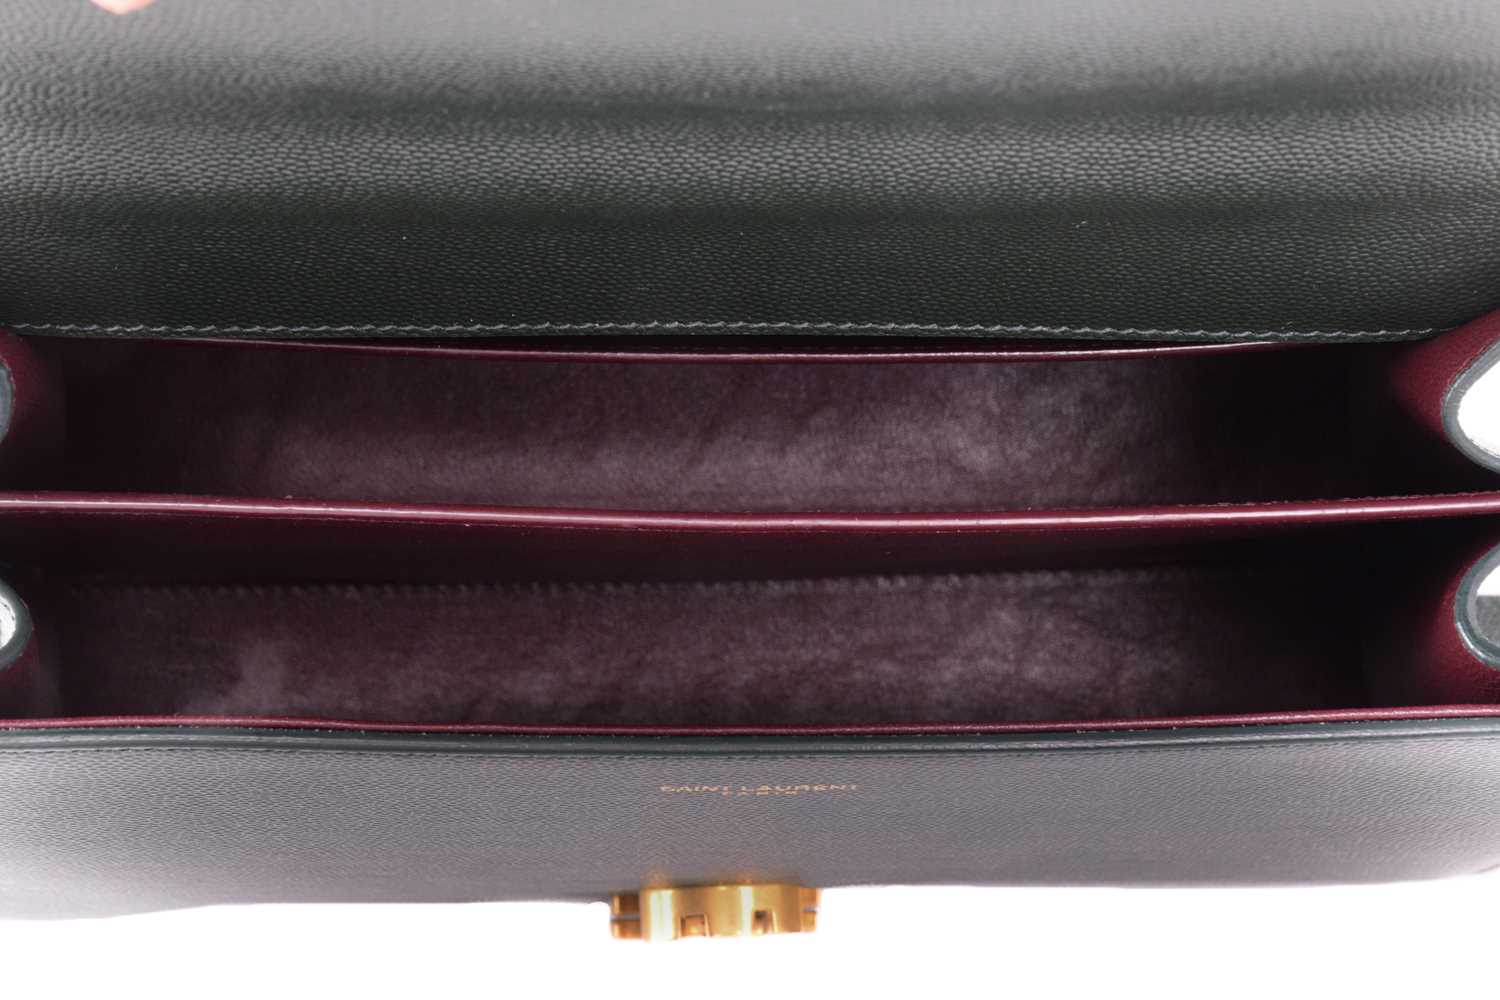 Yves Saint Laurent - a 'Cassandra' medium top handle in hunter green embossed leather, with front - Image 7 of 9